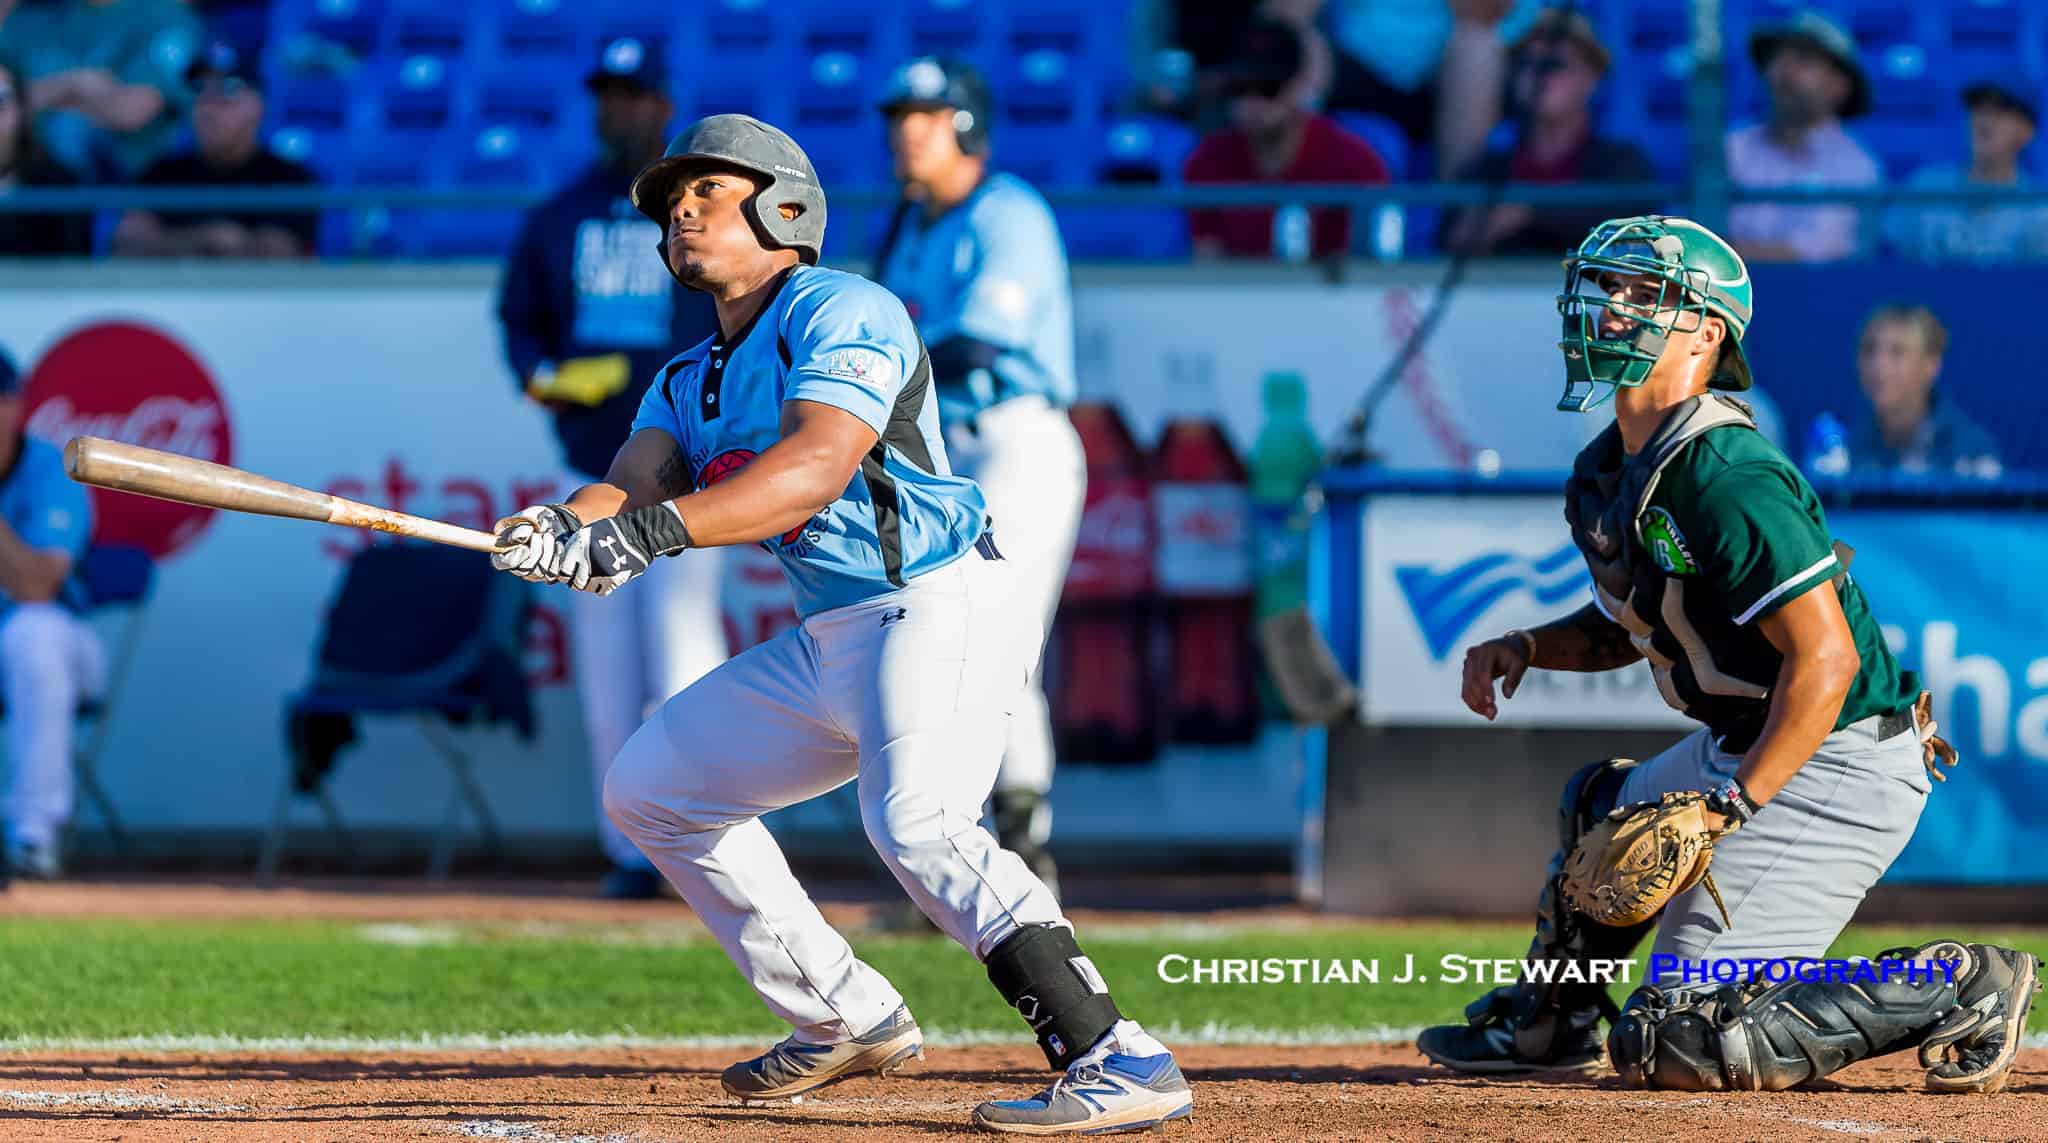 Pippins Overcome Early Deficit to Drown Mussels